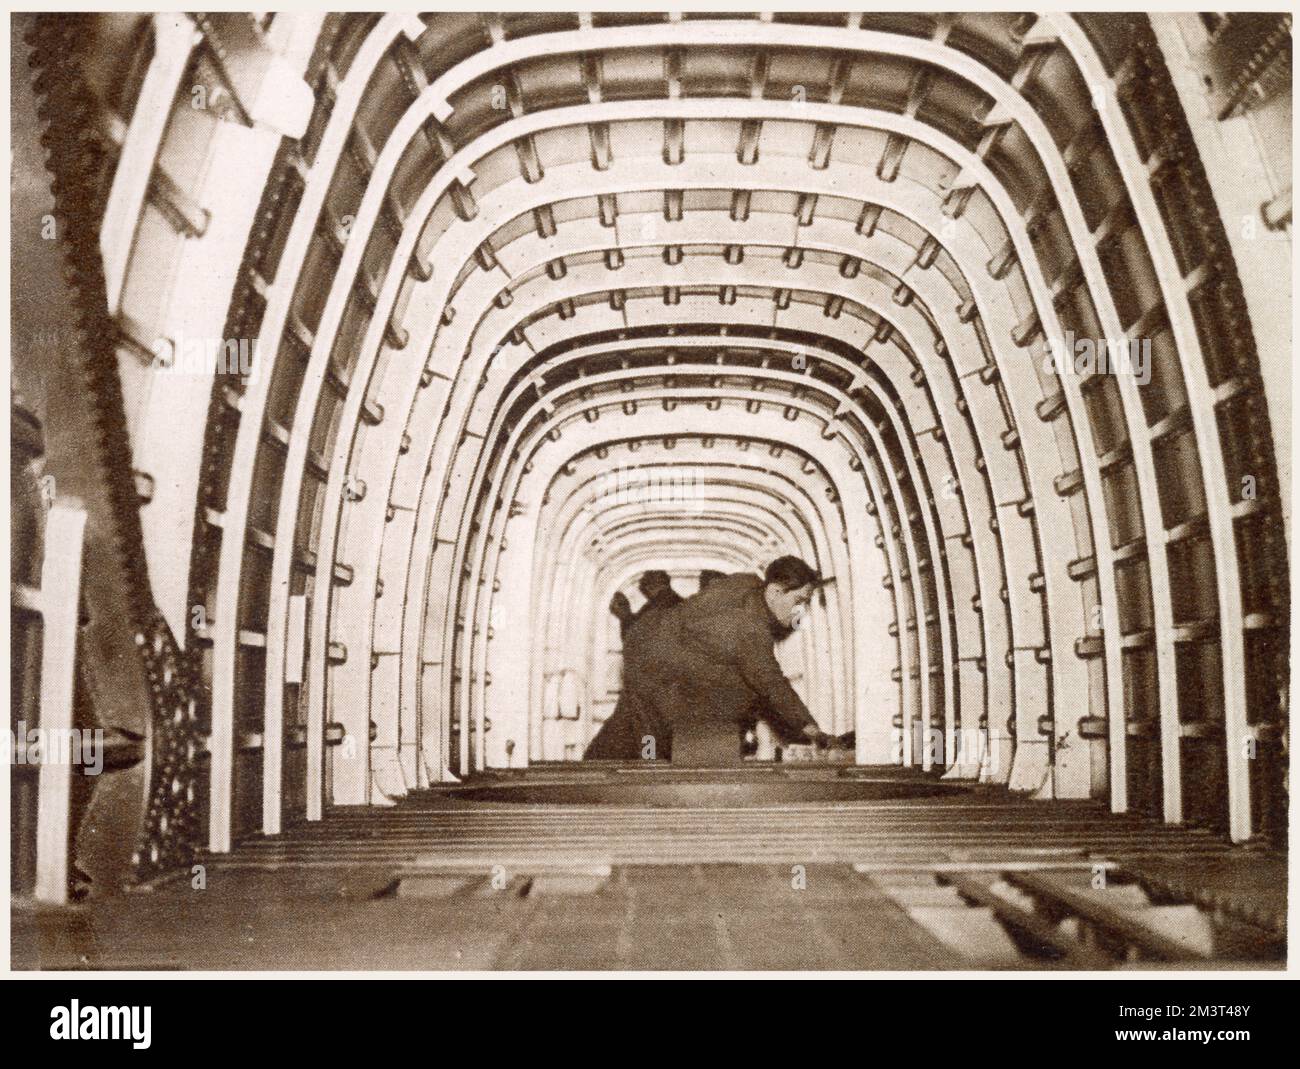 The interior of the fuselage of the Whitley bomber at Armstrong Whitworth in Coventry. The photograph gives a good impression of the size of the aircraft and shows the construction.      Date: March 1939 Stock Photo